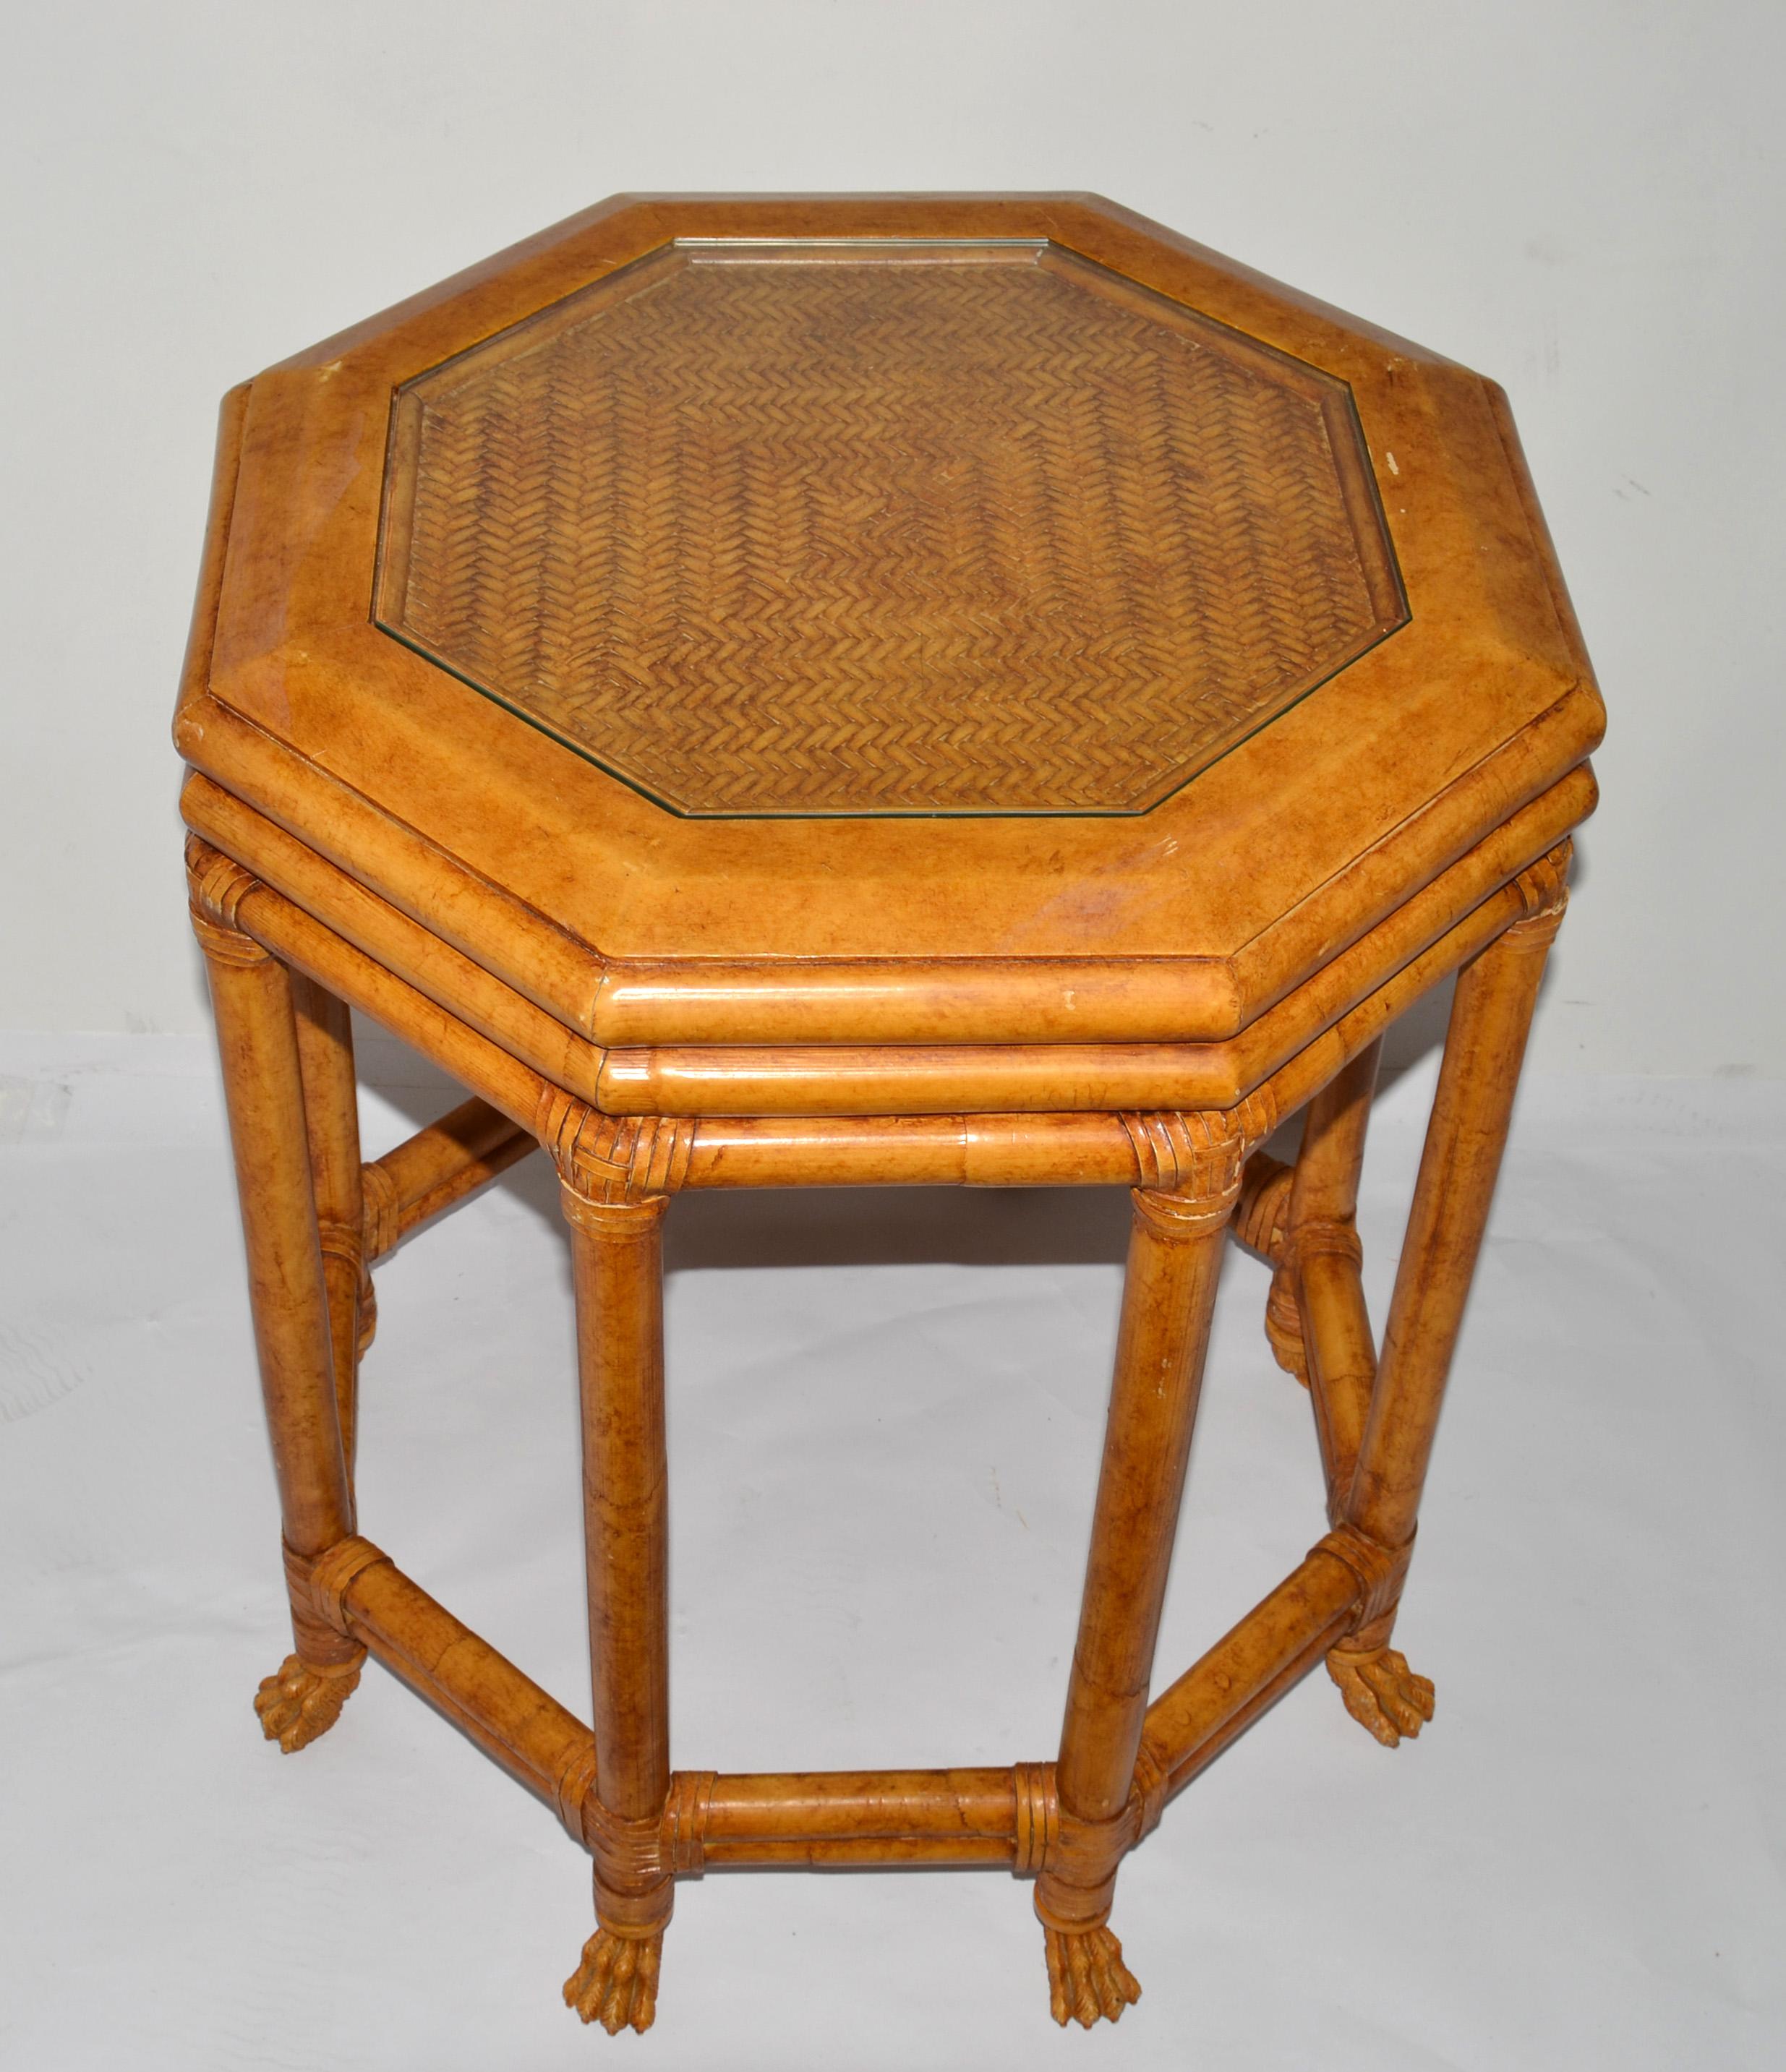 Late 20th Century McGuire Style Octagonal Bamboo Burl Veneer Leather Bindings Glass Accent Table  For Sale